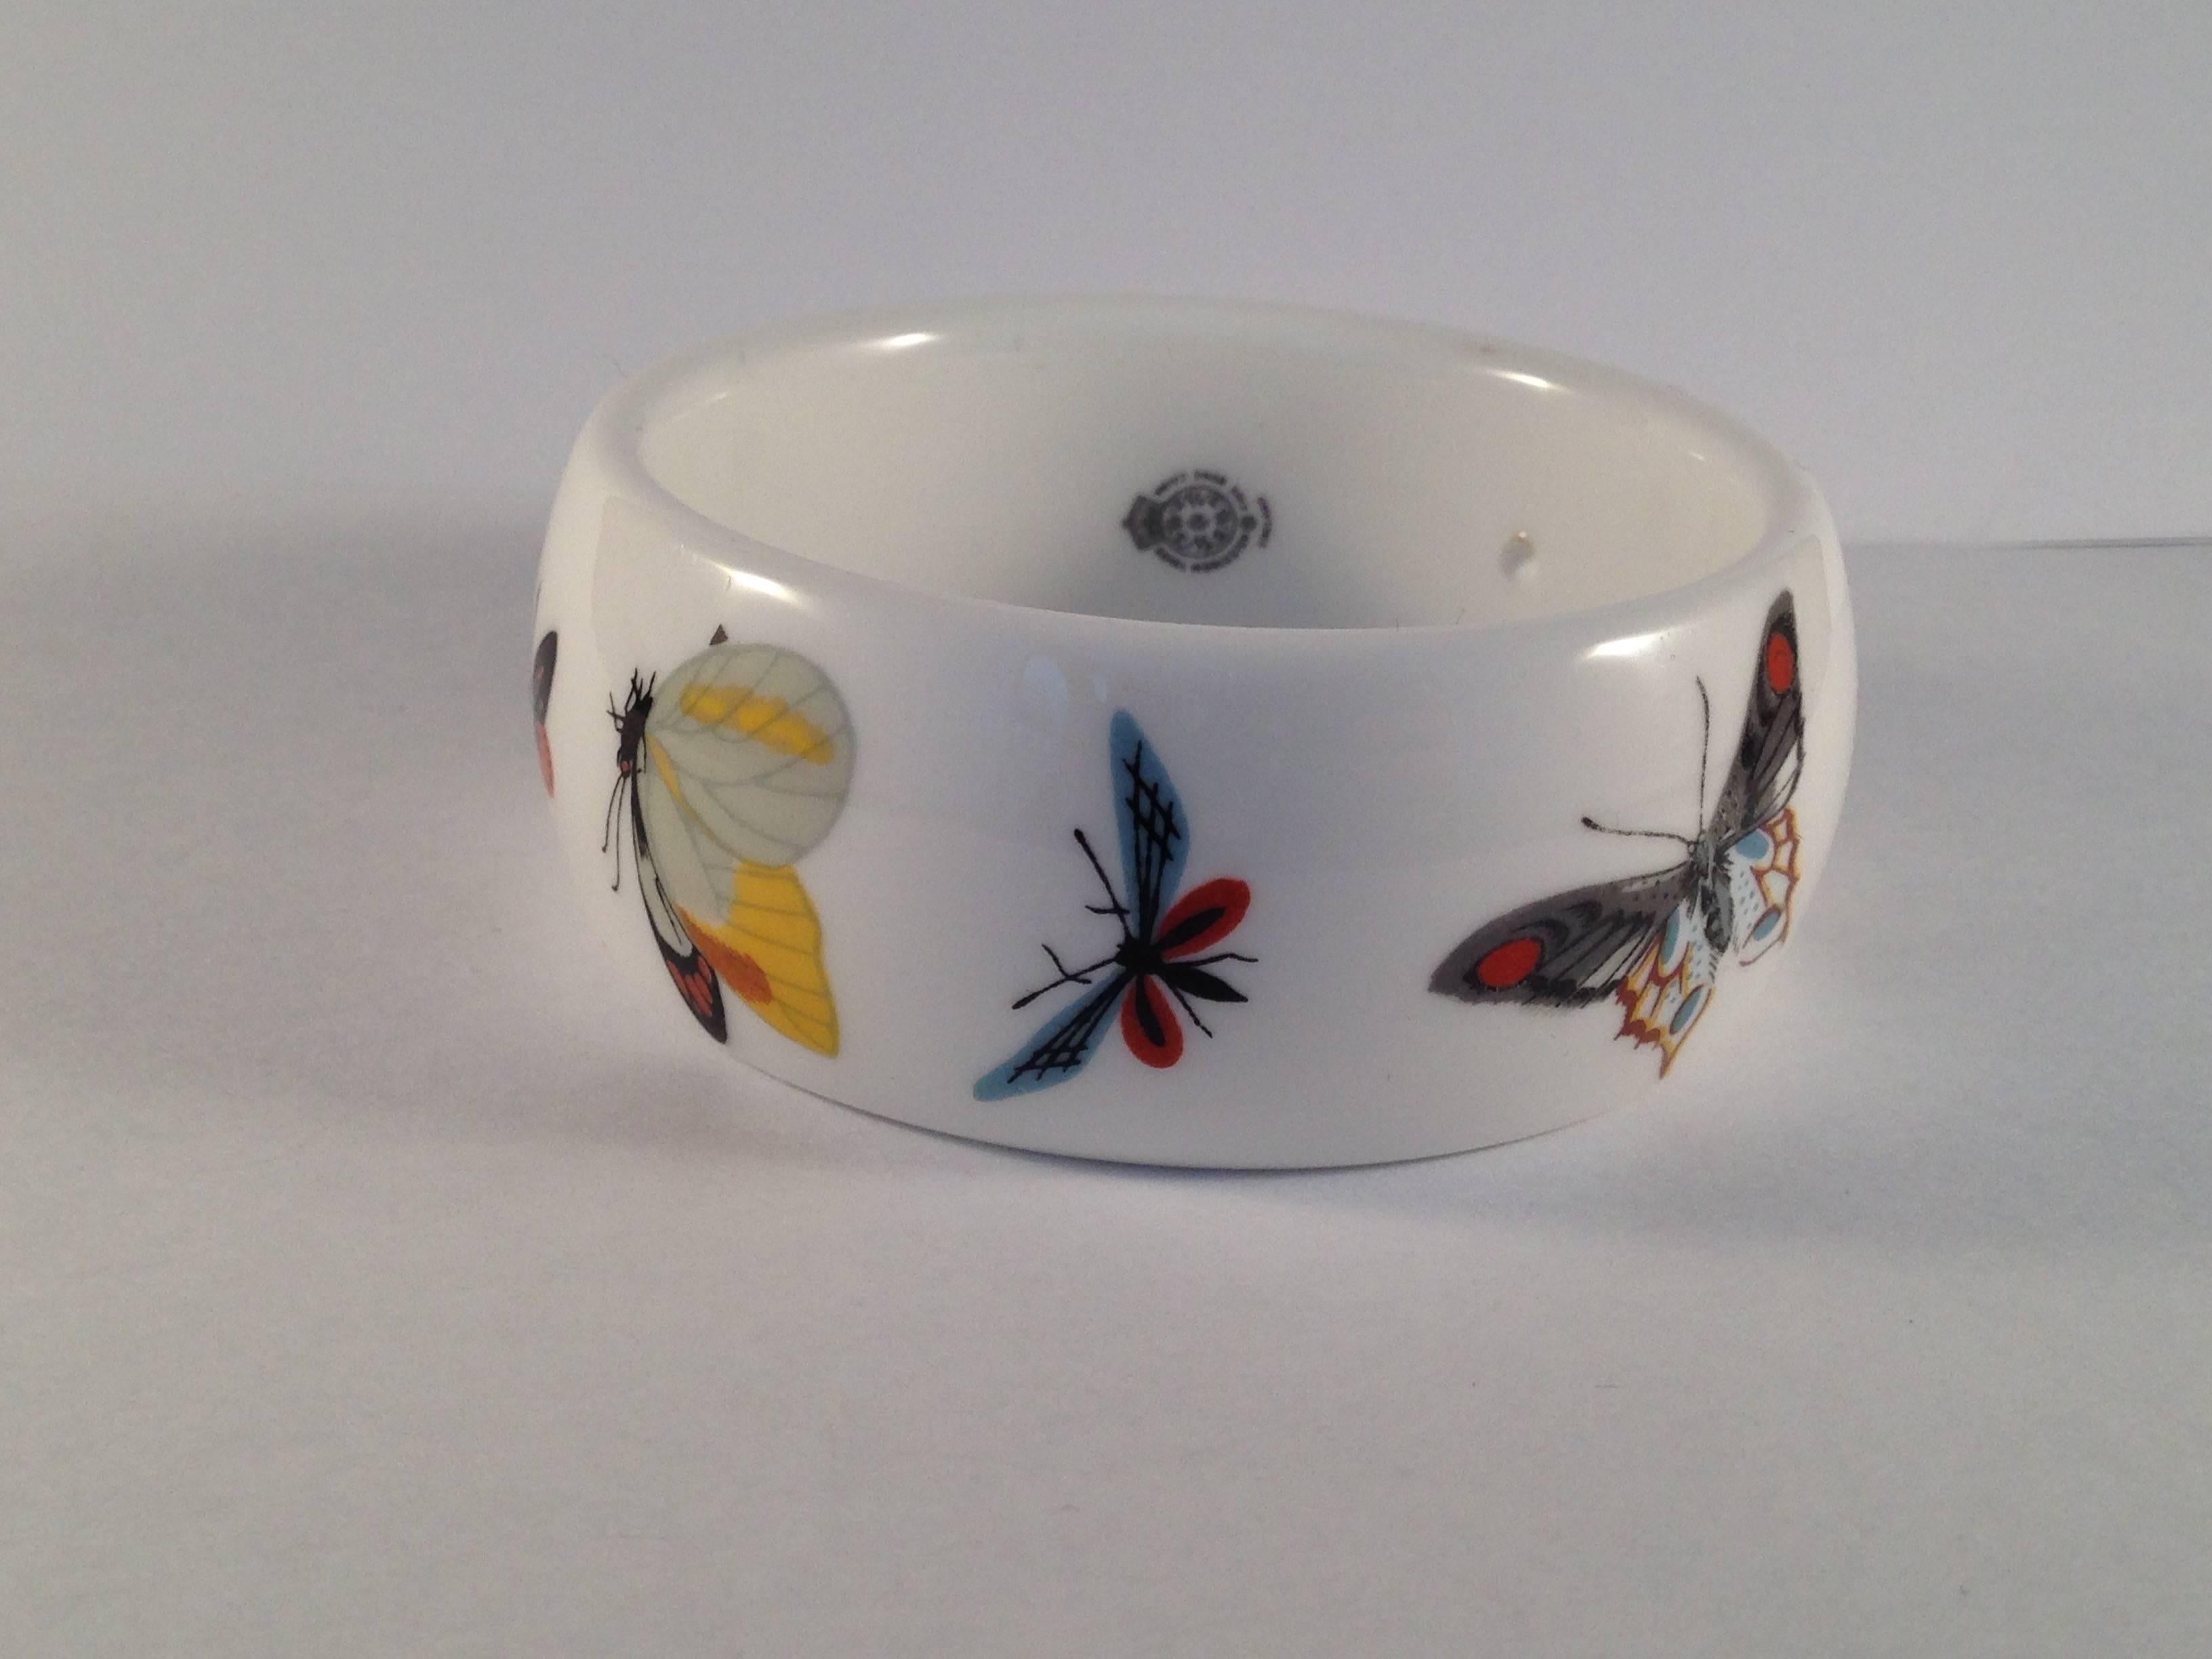 This is a bone china bracelet designed by Kenneth Jay Lane for the Royal Worchester Company. In 1976, Lane went to the Royal Worchester headquarters in England and chose several of their classic bone china patterns to fashion into necklaces and